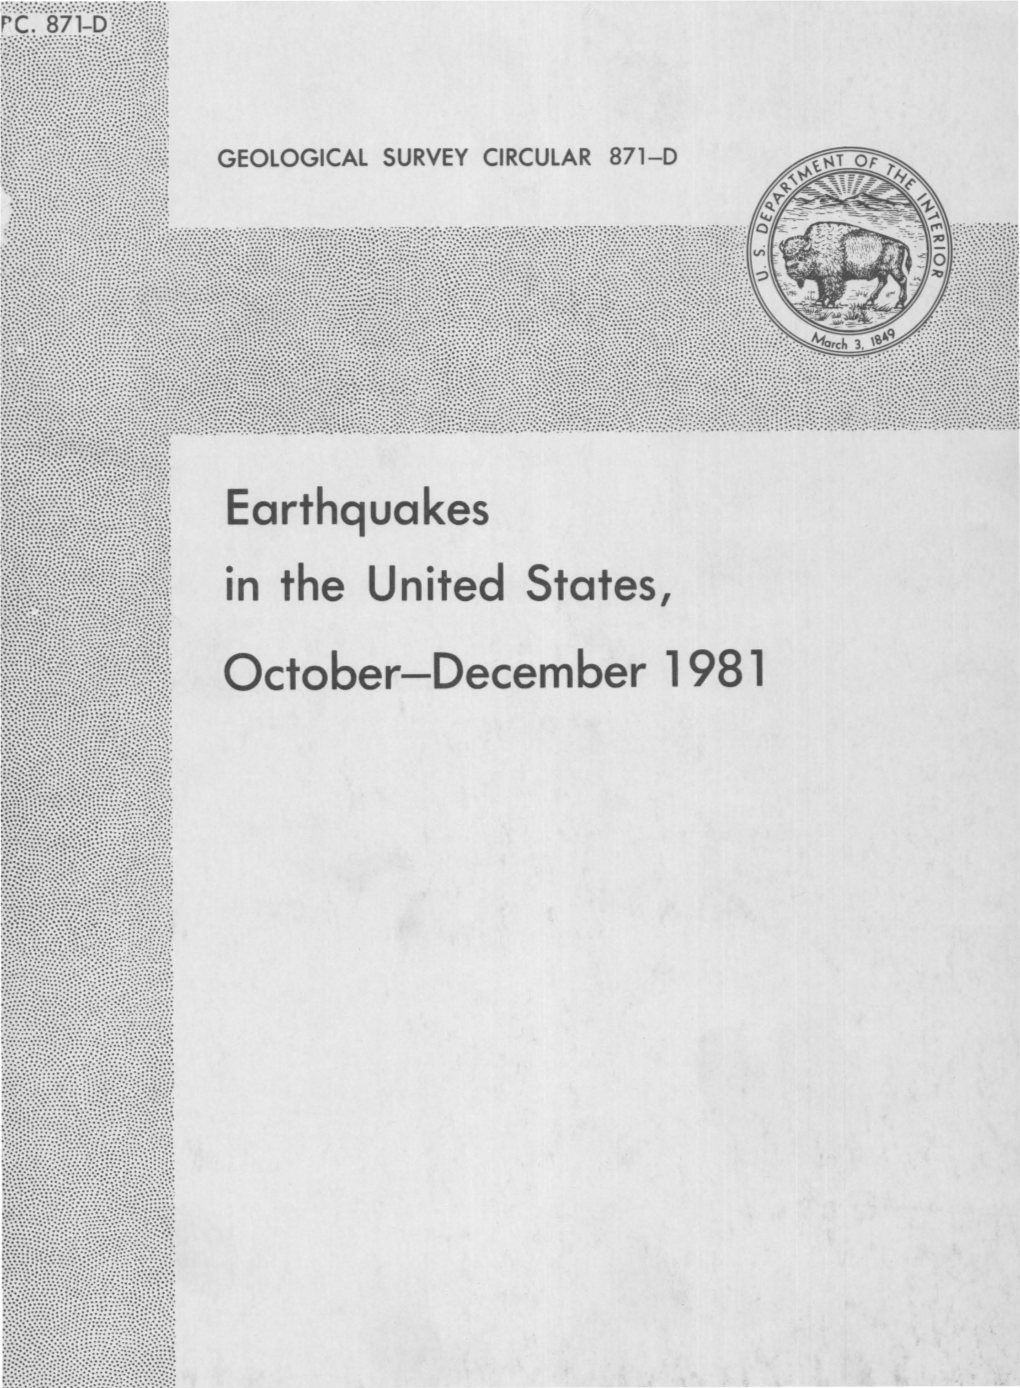 Earthquakes in the United States, October-December 1981